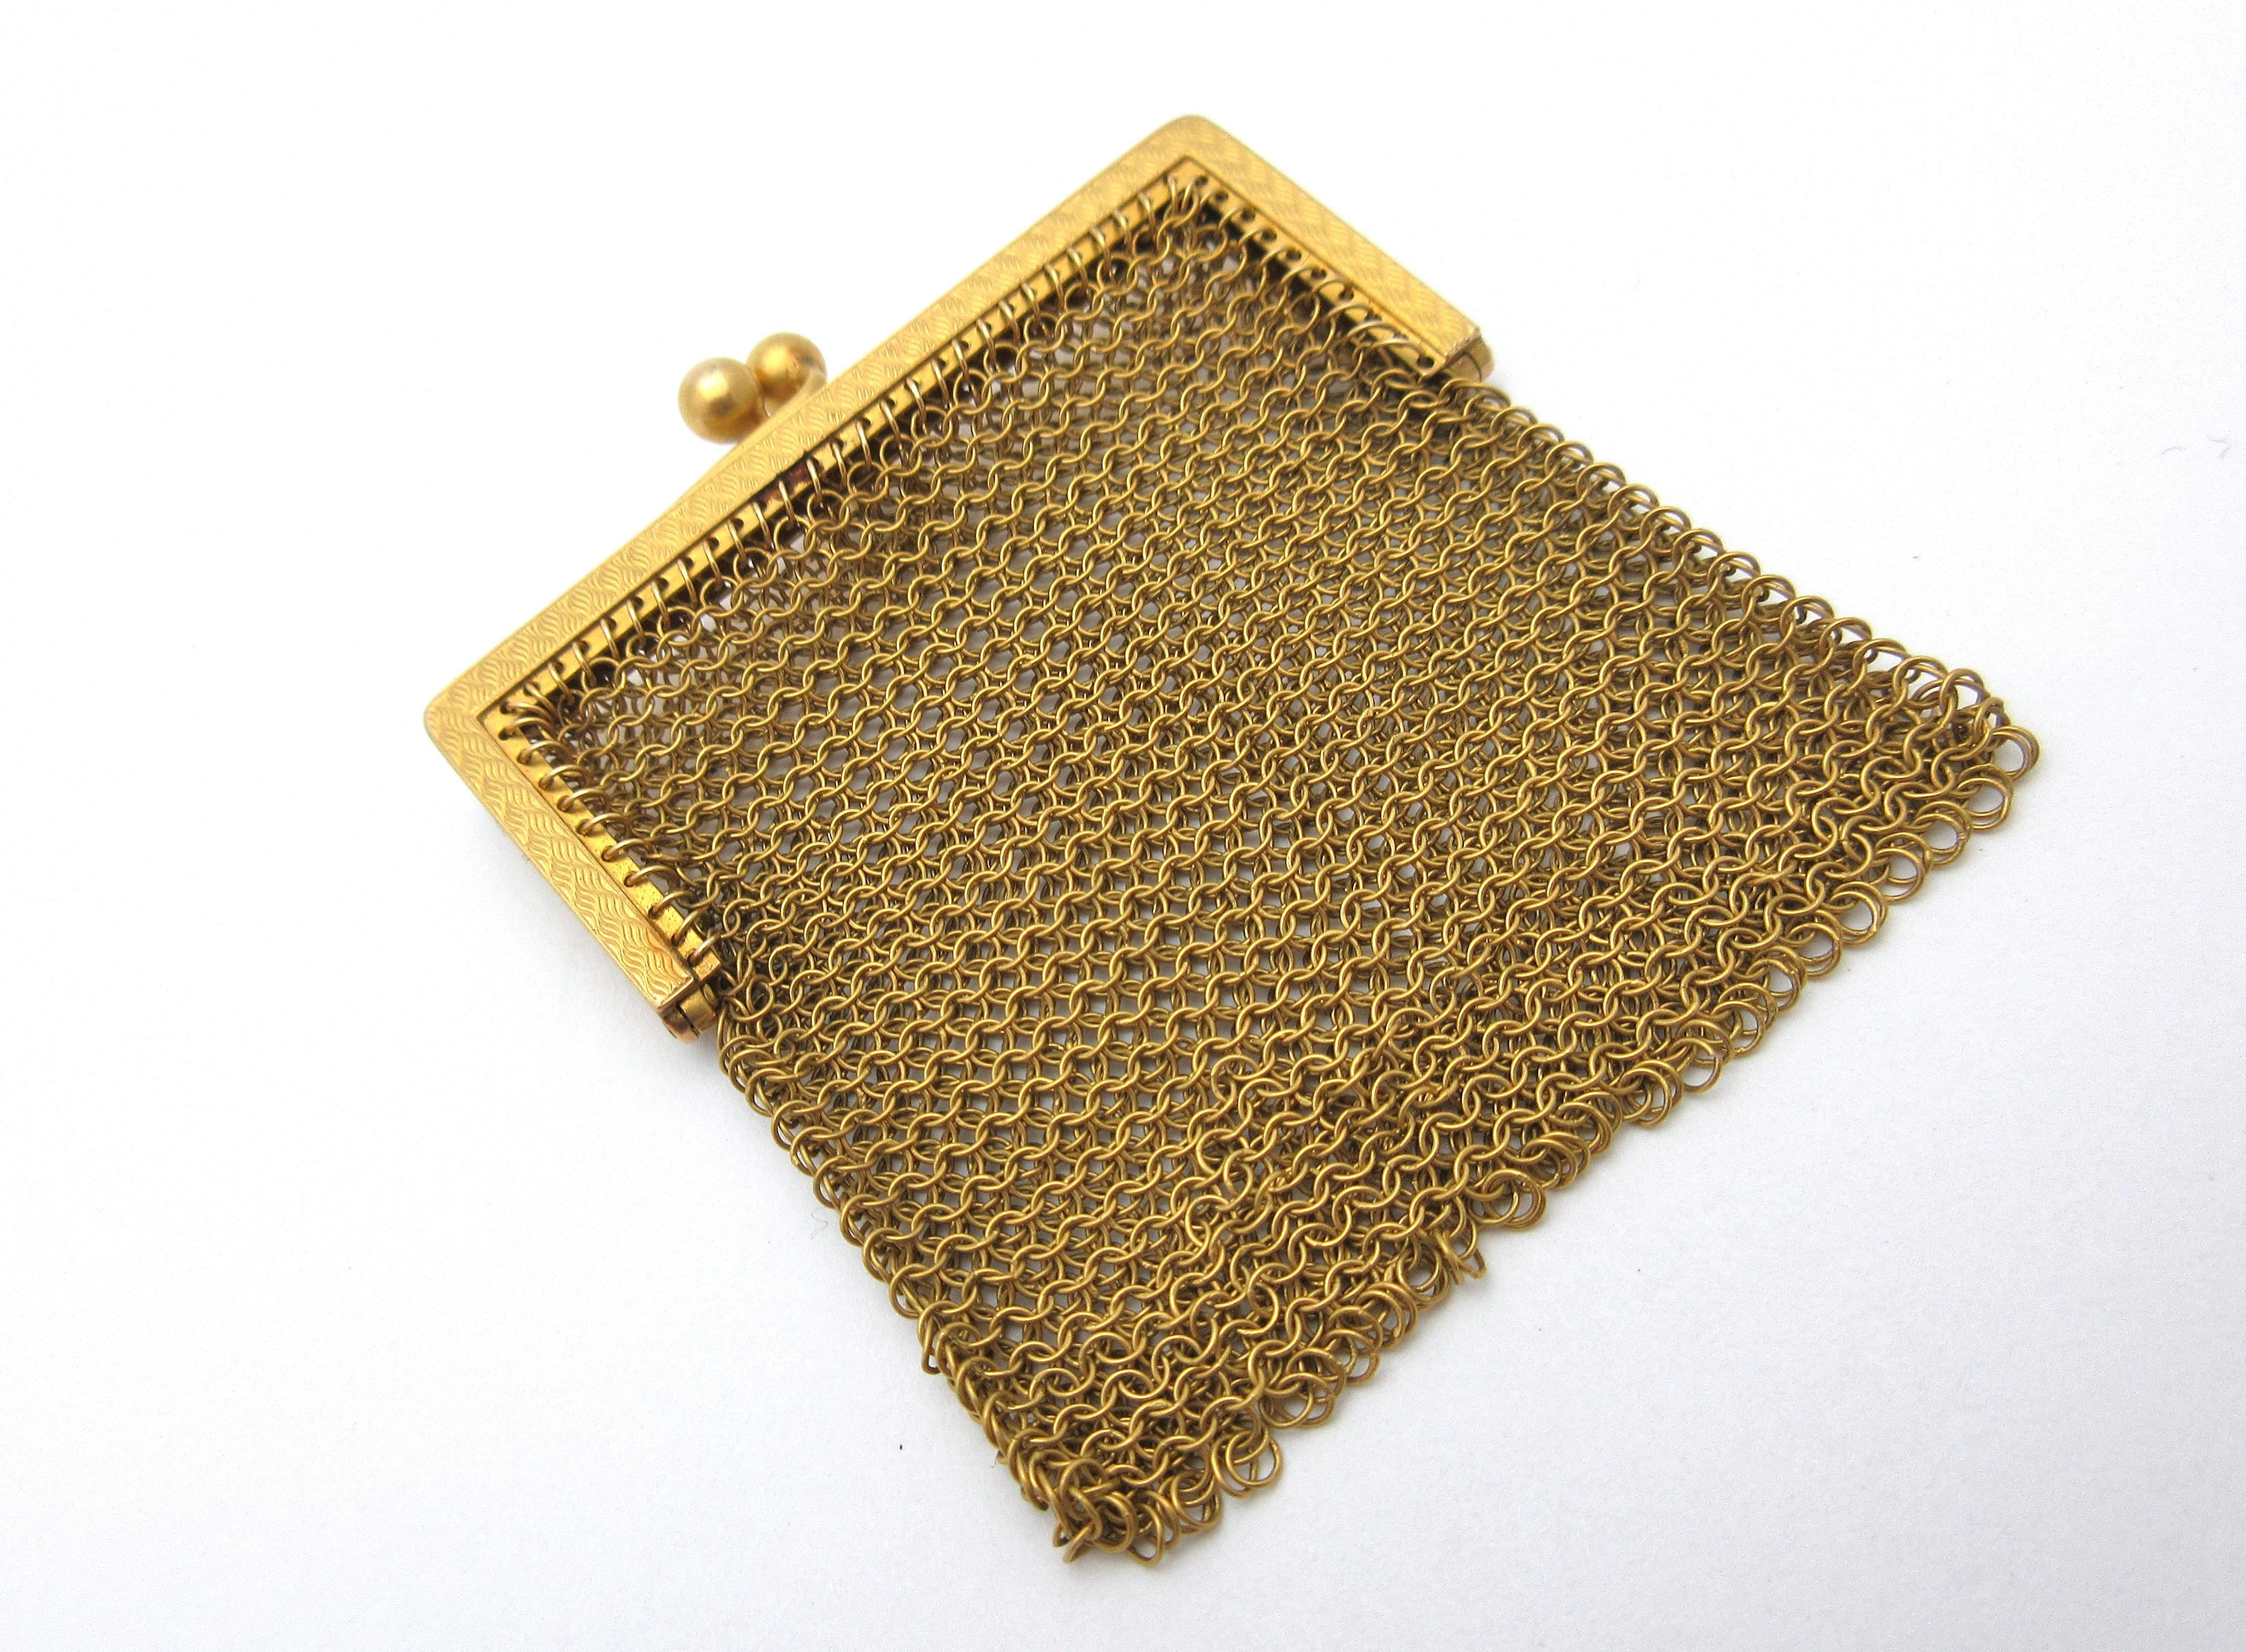 This beautiful little mesh purse was likely worn on a woman's chatelaine during the turn of the 20th century.  It was made from 14k yellow gold by Carter, Gough, & Co (in business from 1841-1922) in Newark, NJ.  The coin purse features a patterned